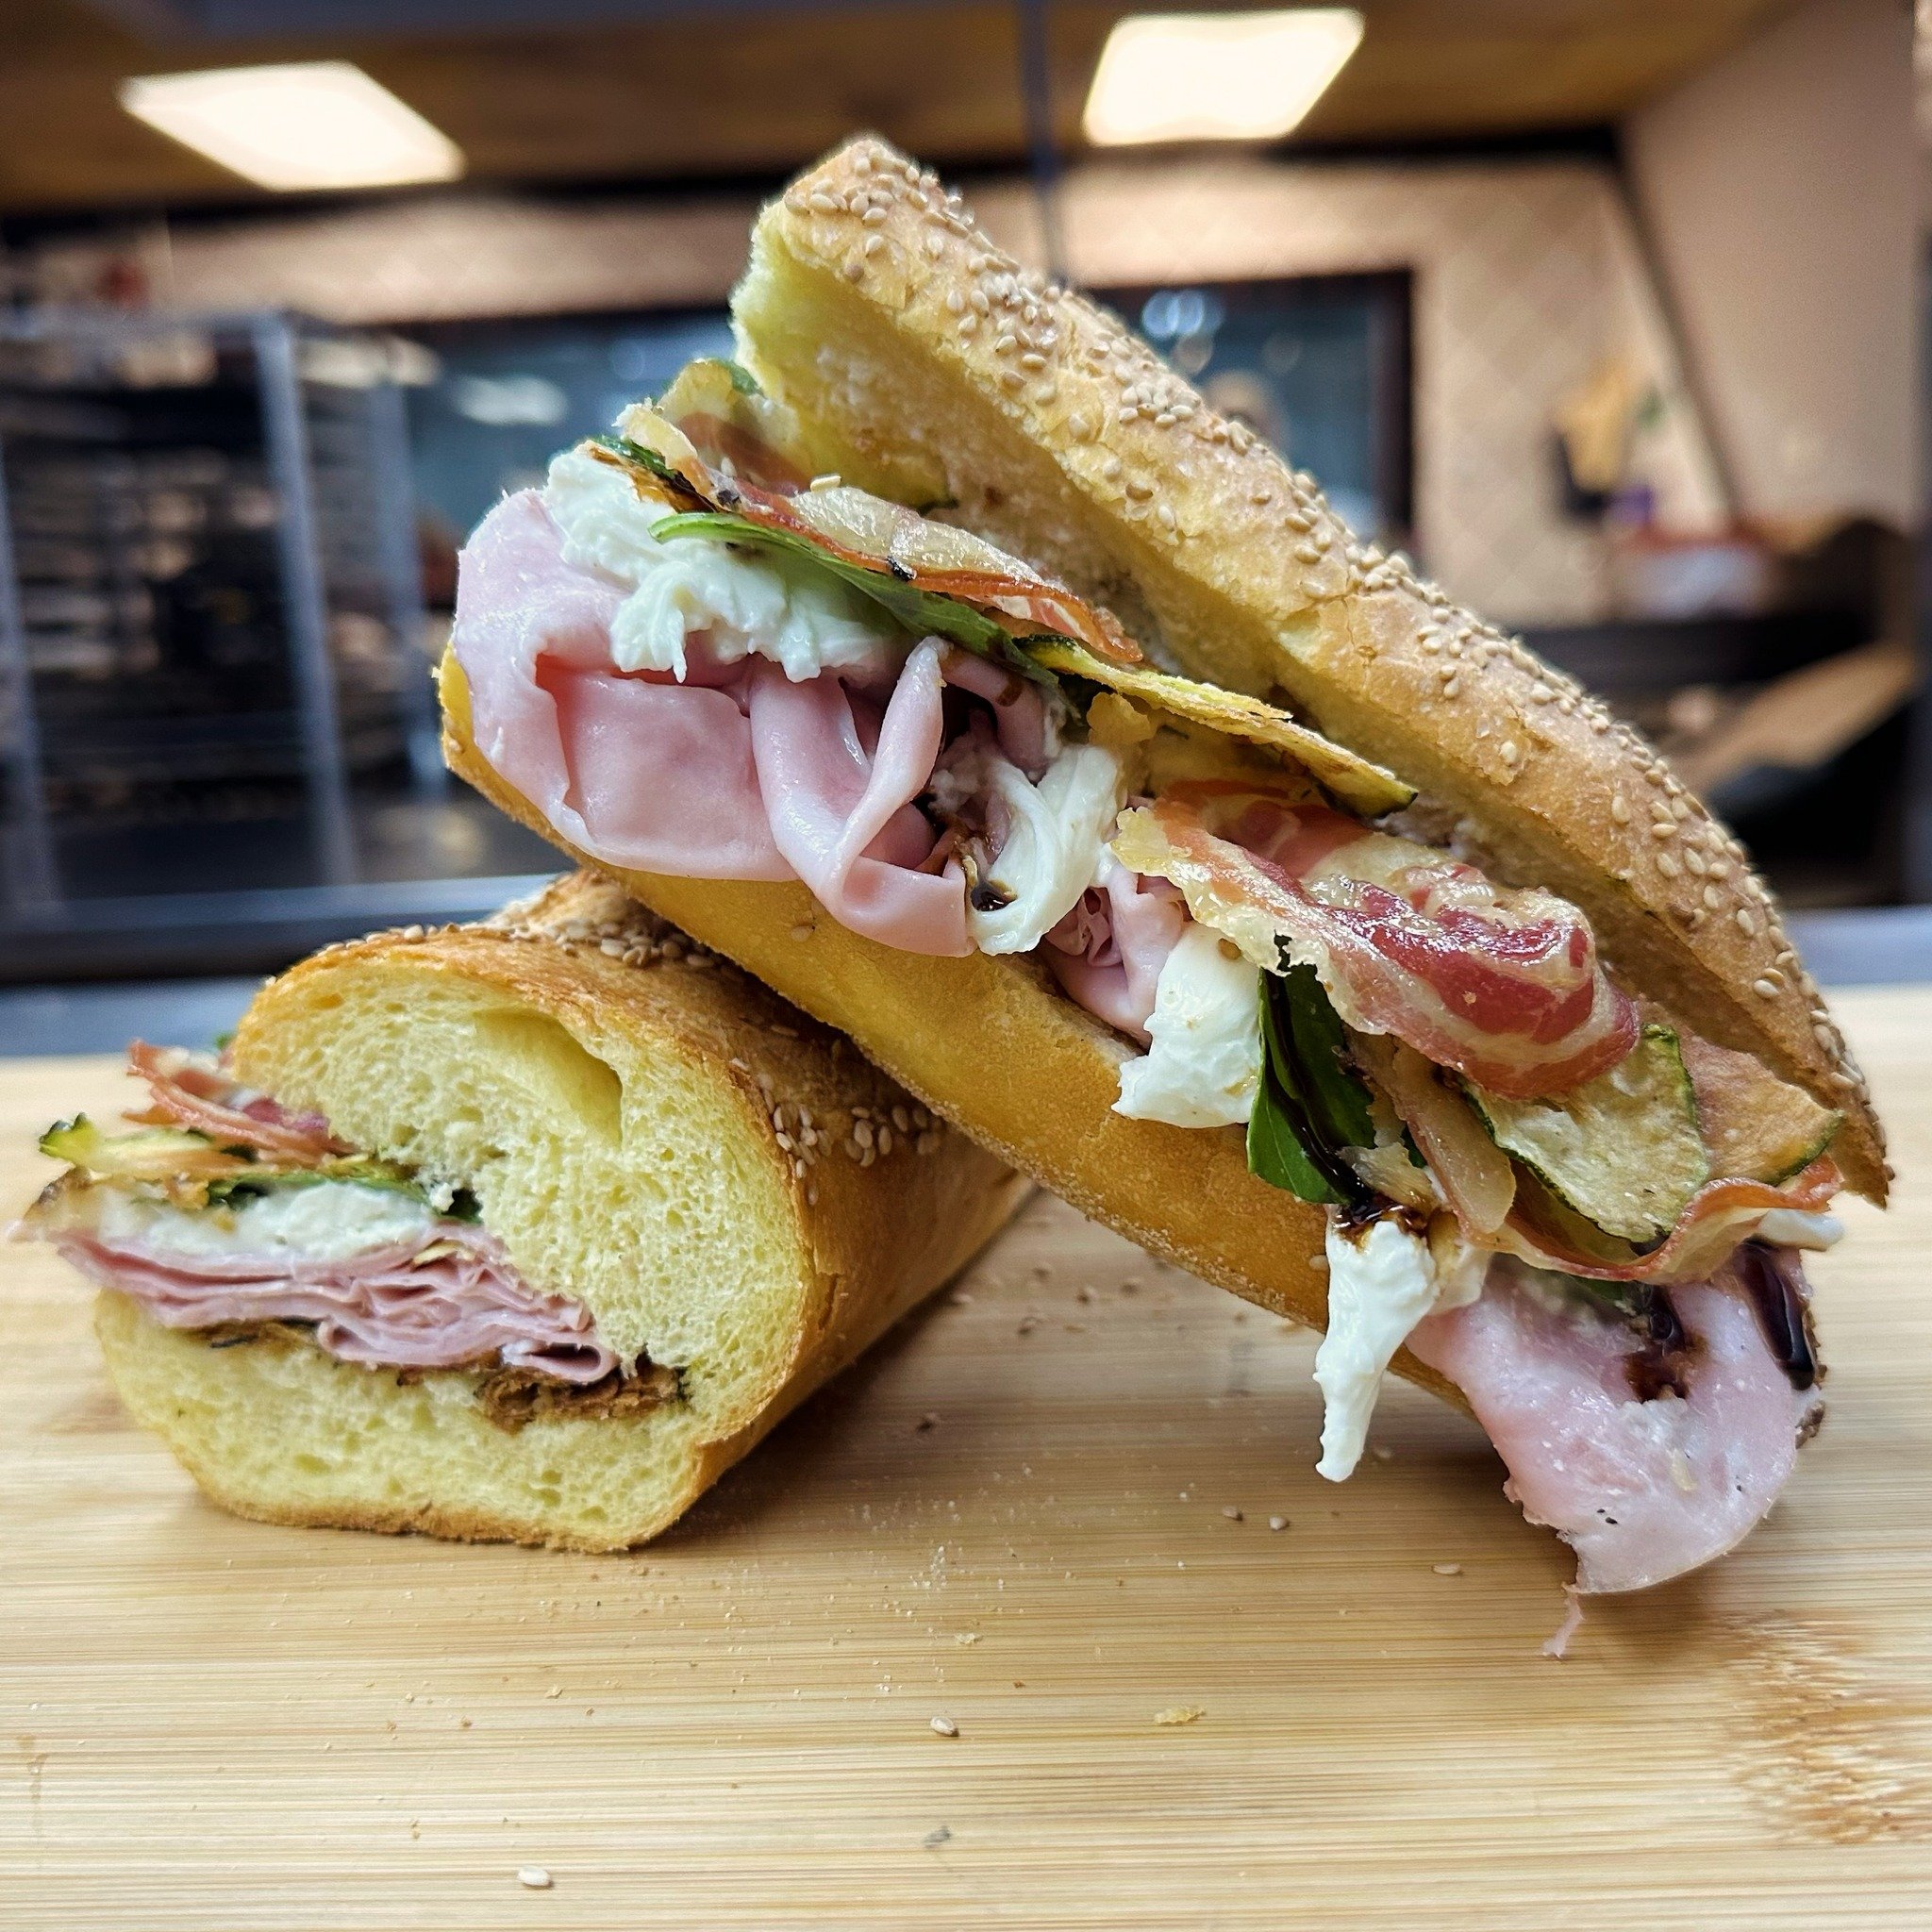 🚨SANDWICH SATURDAY🚨

Available Saturday, April 27th ONLY!
✨ Porcu Cucuzza Sandwich ✨

An artisanal semolina baguette with thinly sliced mortadella, baked pancetta, fried zucchini, burrata, basil and balsamic glaze! 

Half ($7.99) and Full ($14.00) 